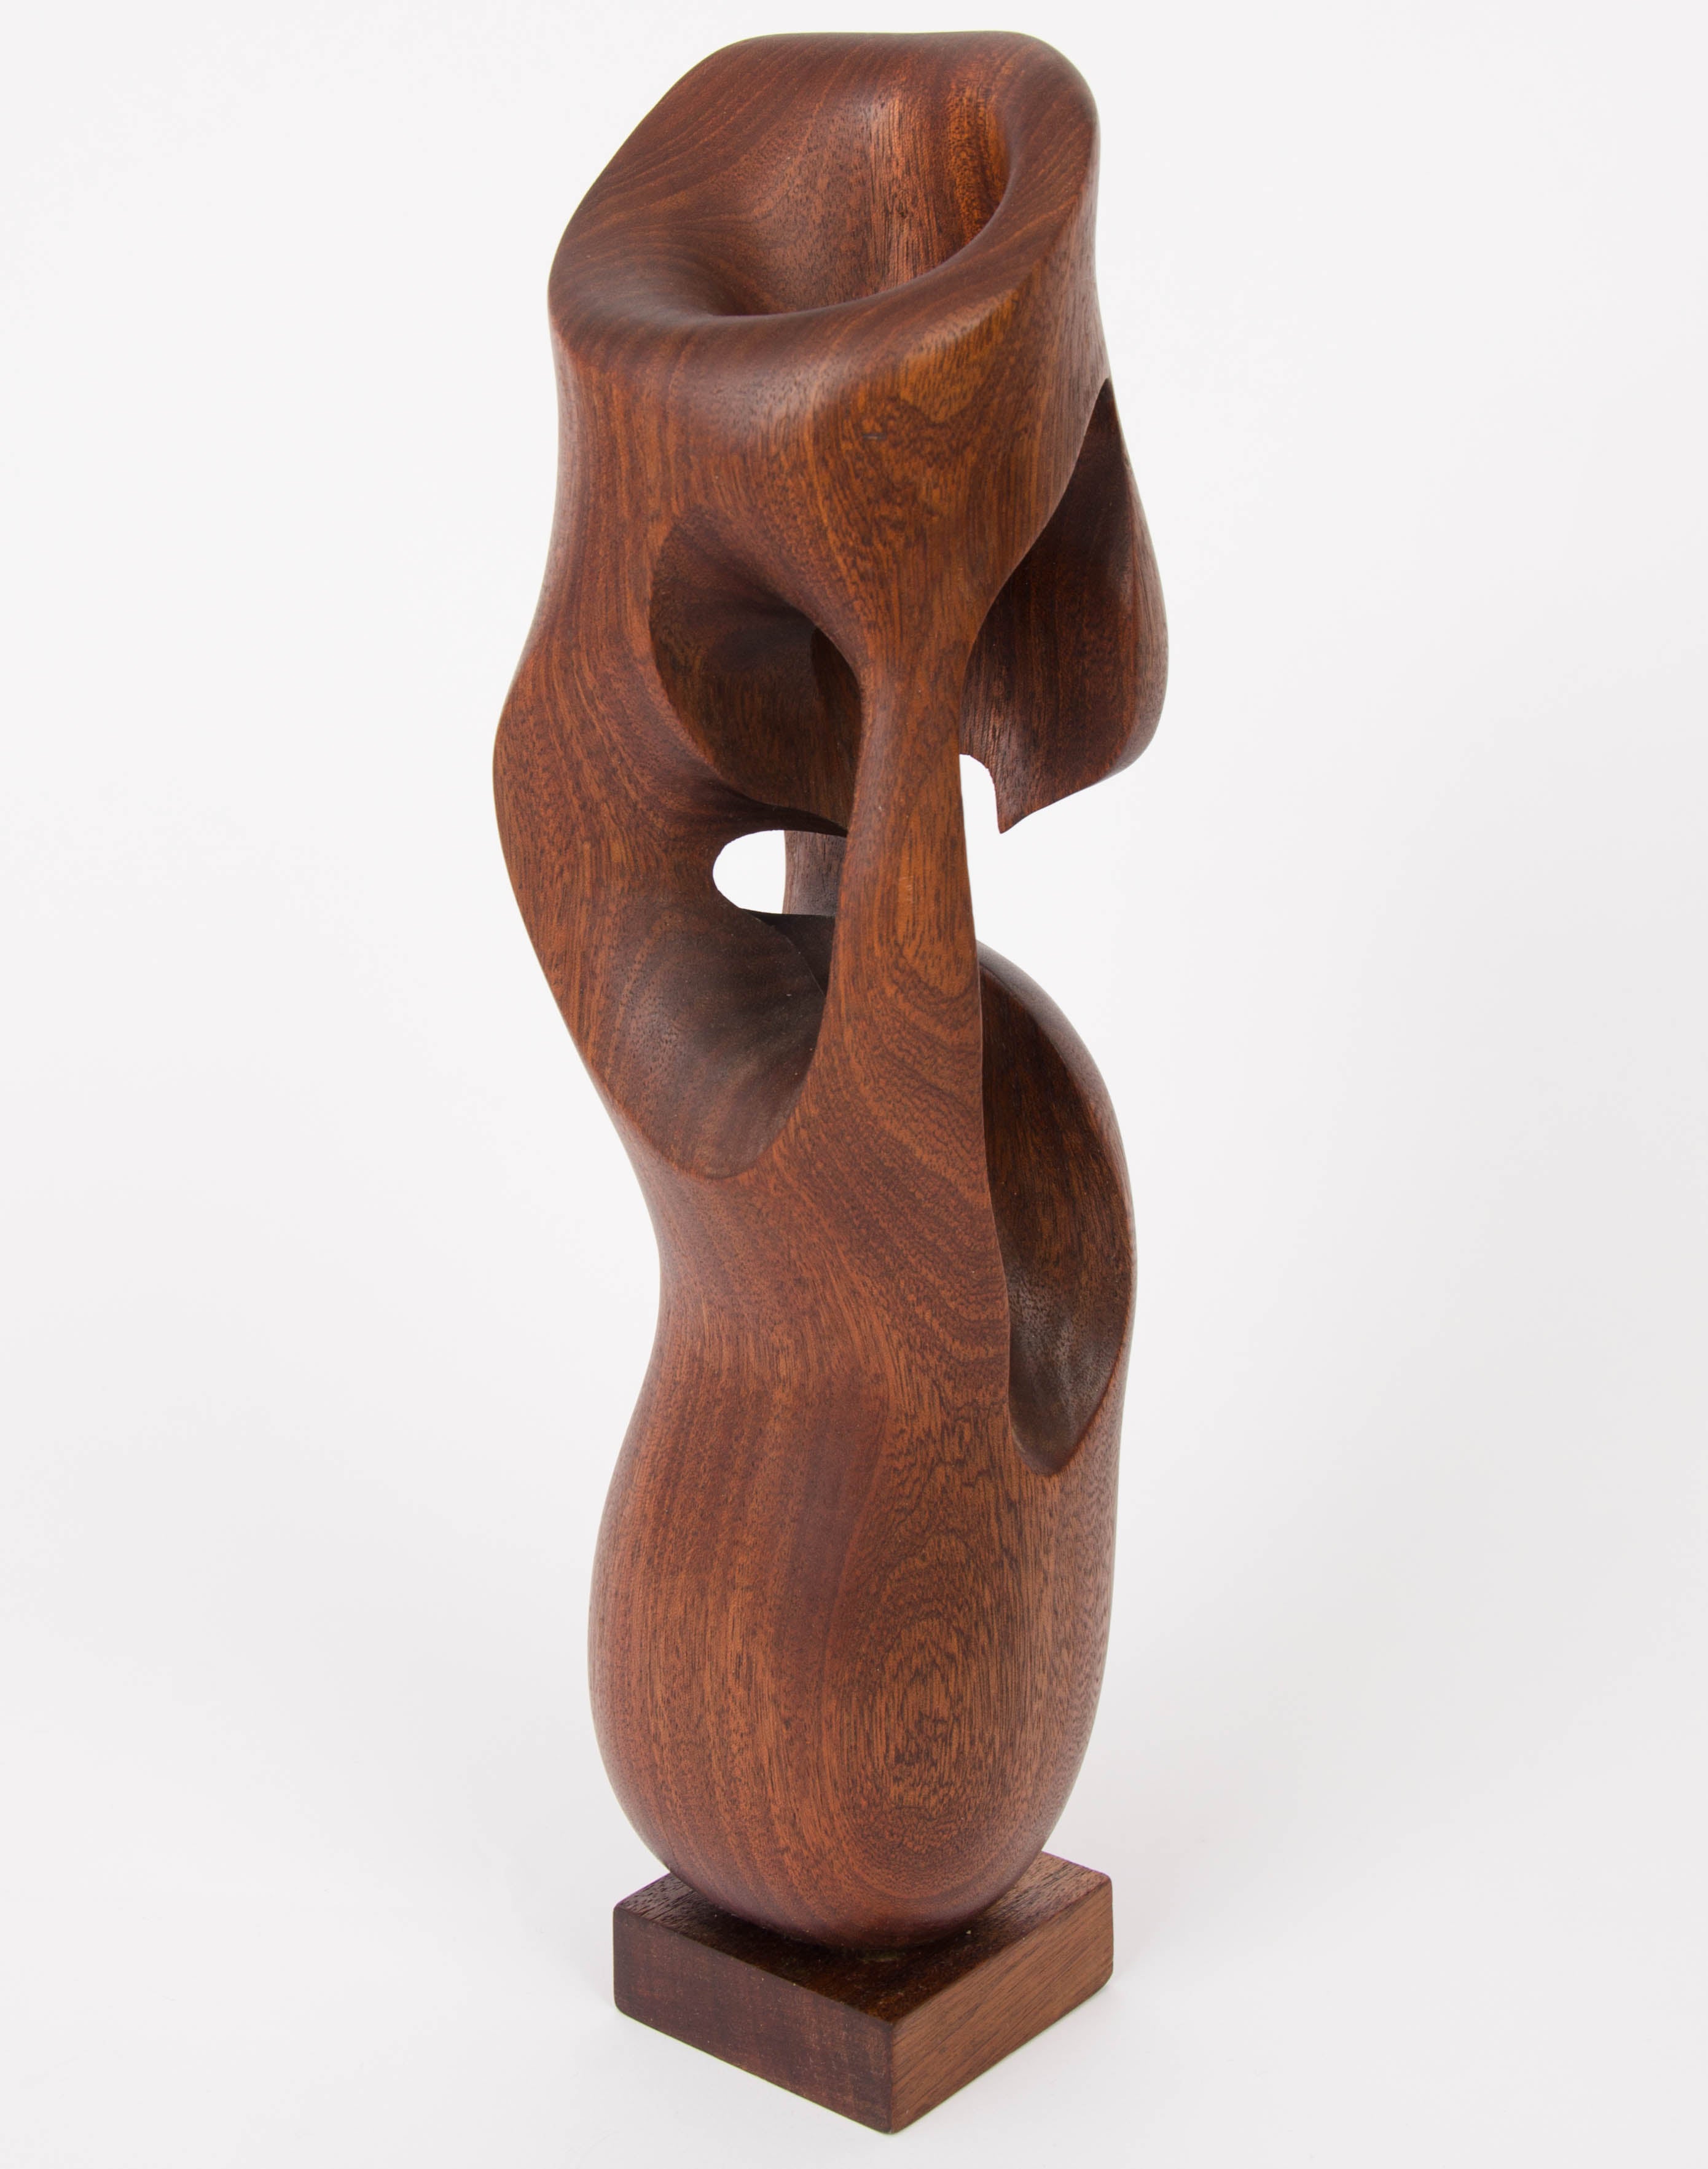 Organic Abstract Sculpture Carved in Mahogany